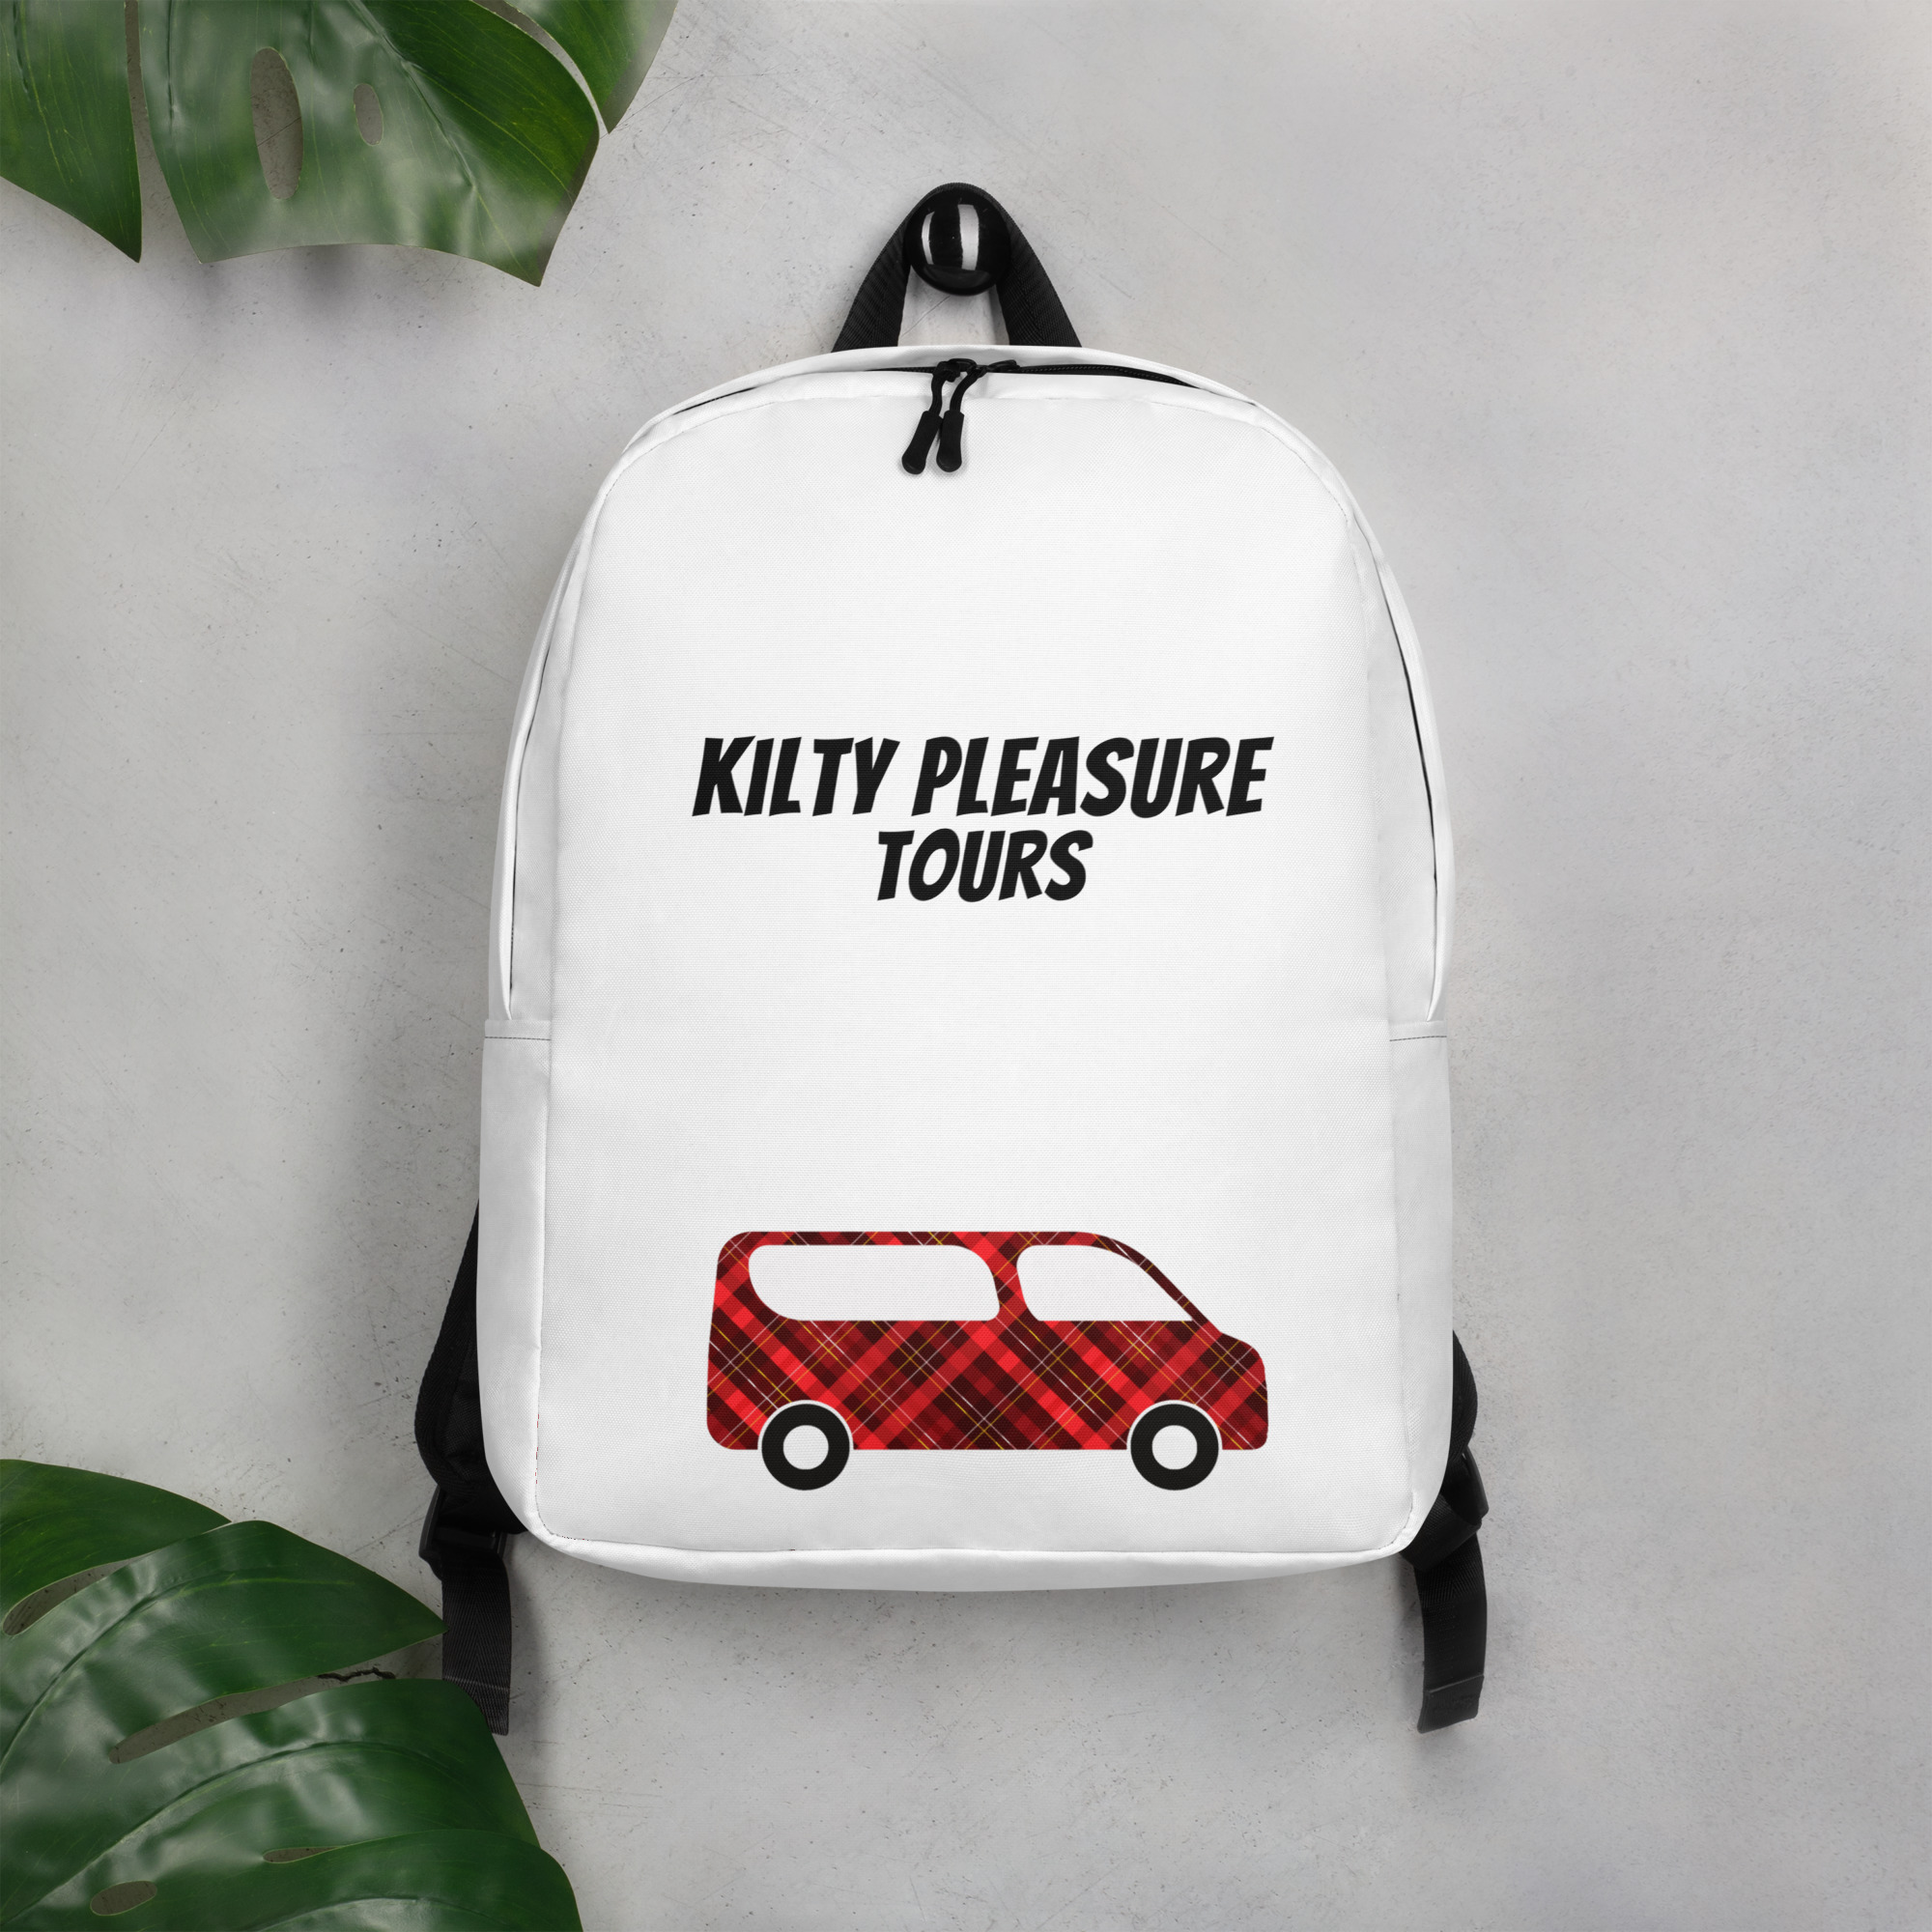 https://www.kiltypleasuretours.com/wp-content/uploads/2023/07/all-over-print-minimalist-backpack-white-front-64a98acd6a988.jpg